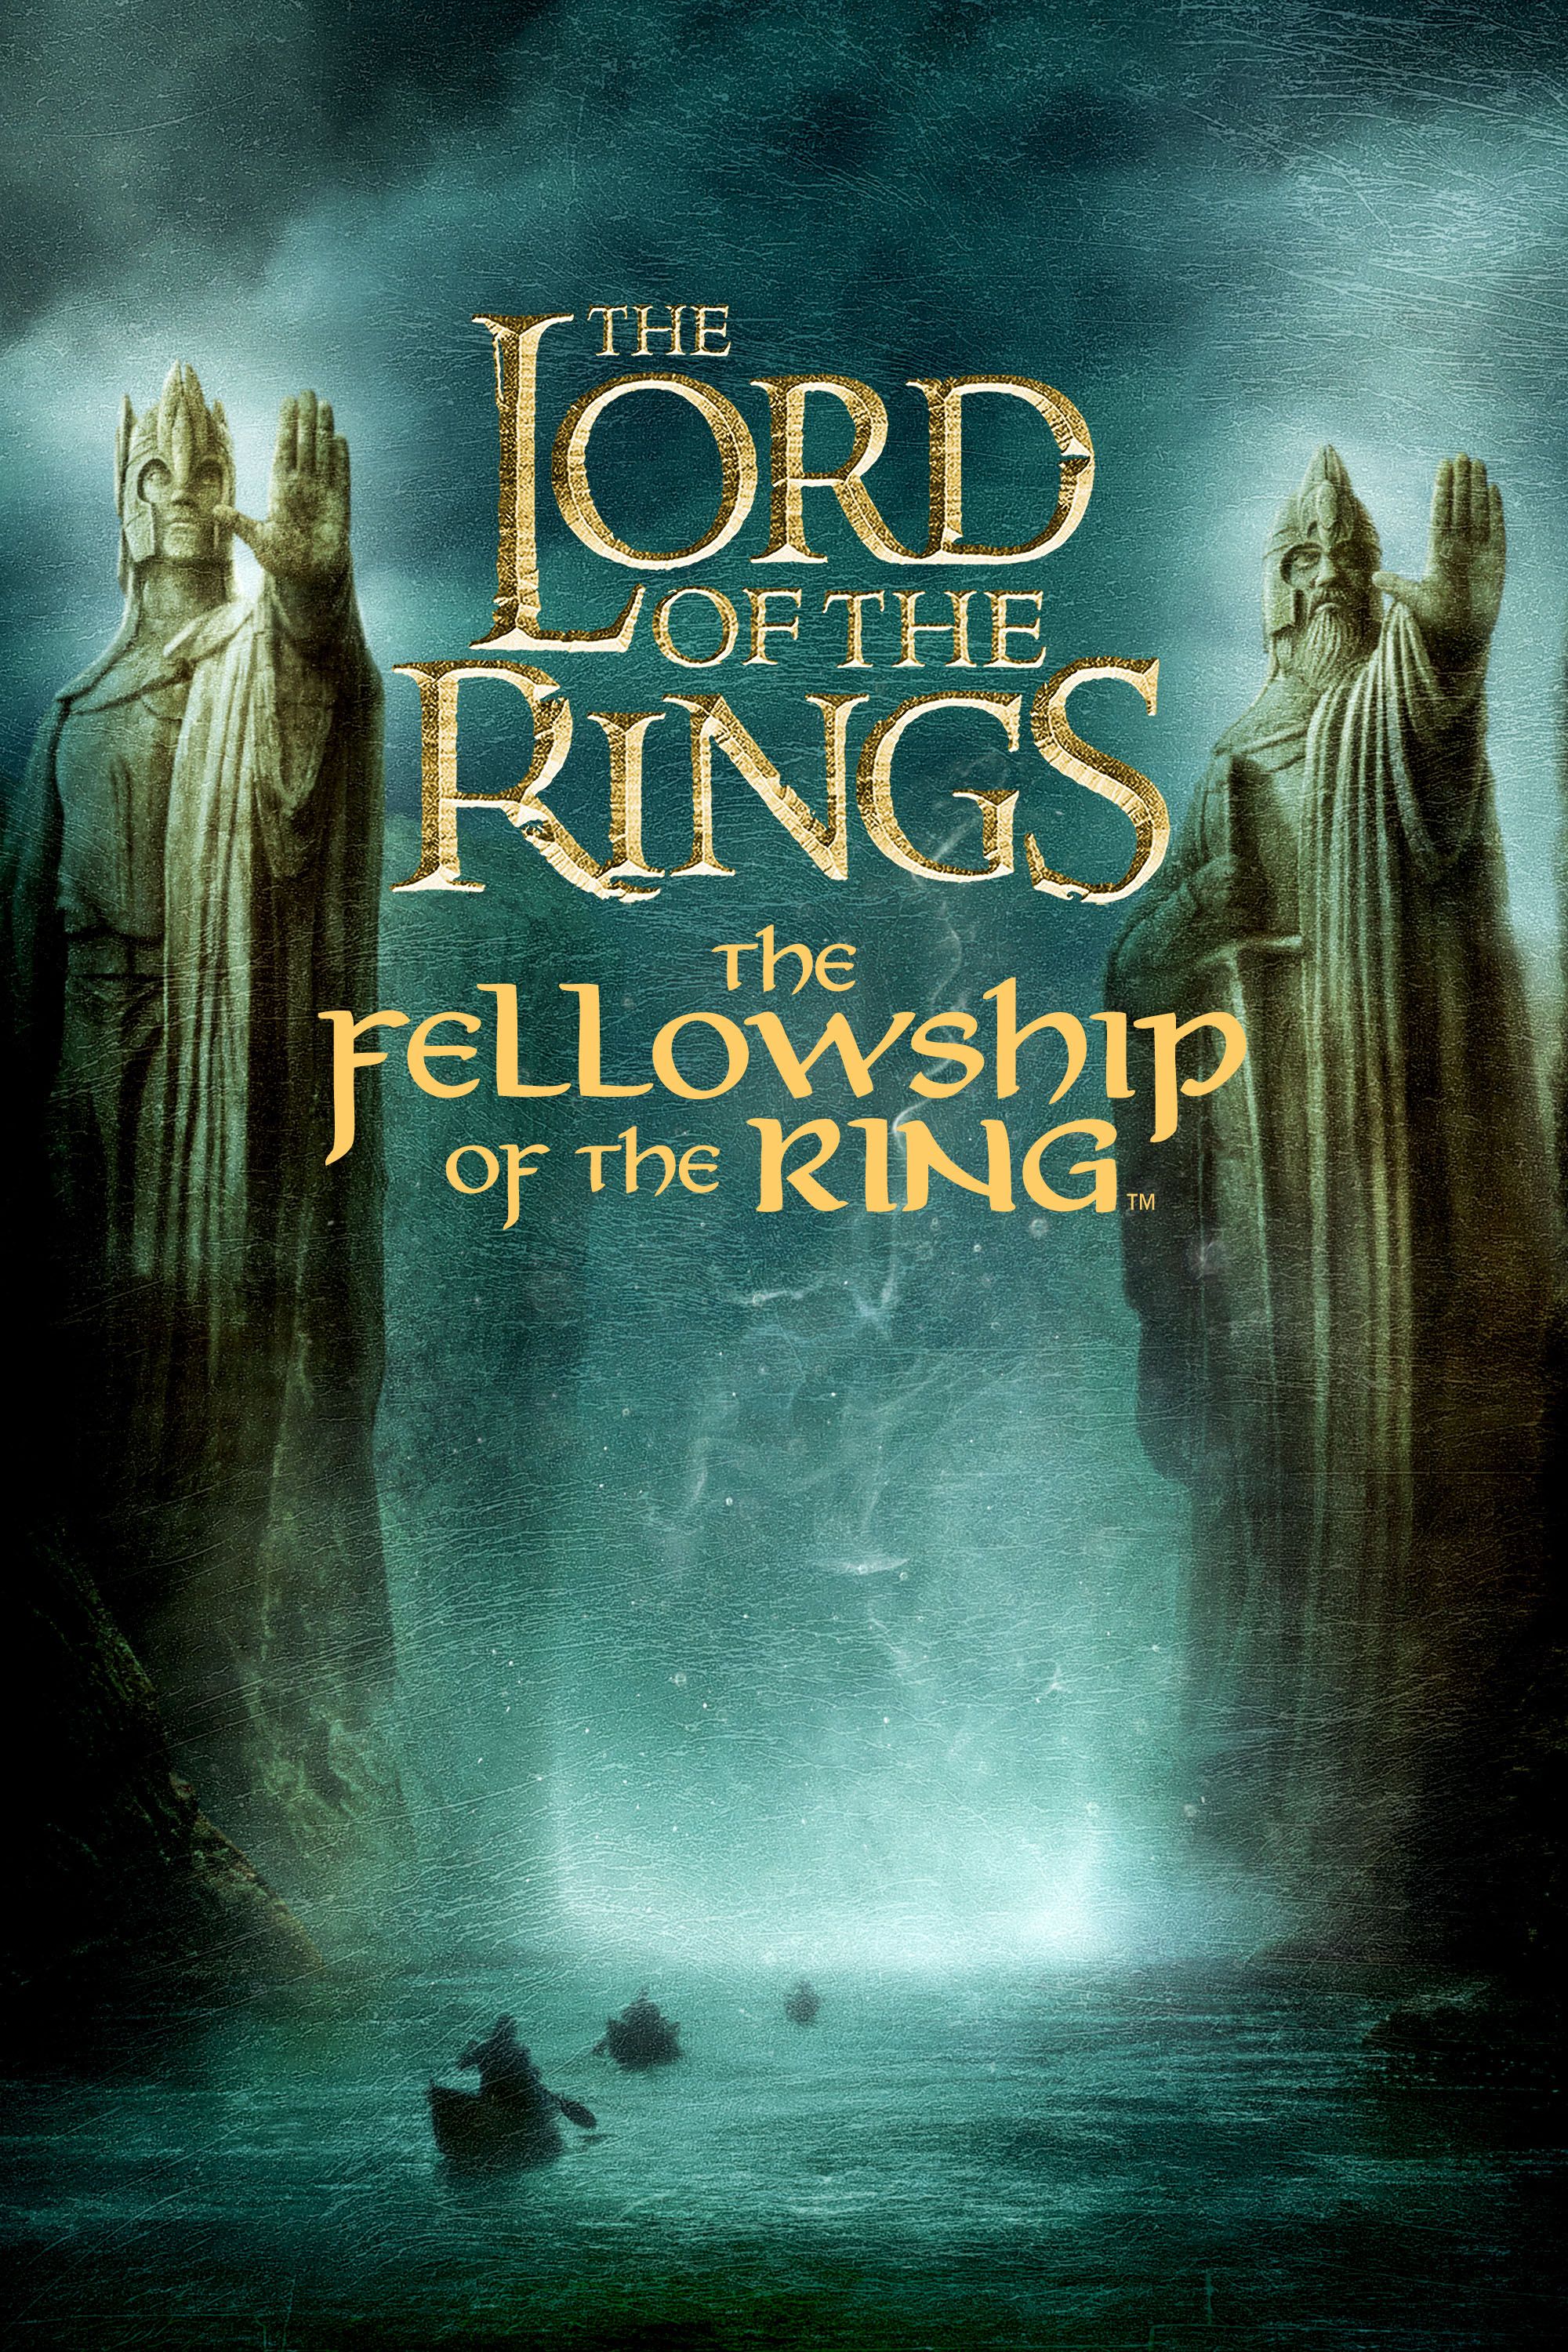 The Lord of the Rings: The Fellowship of the Ring movie cover